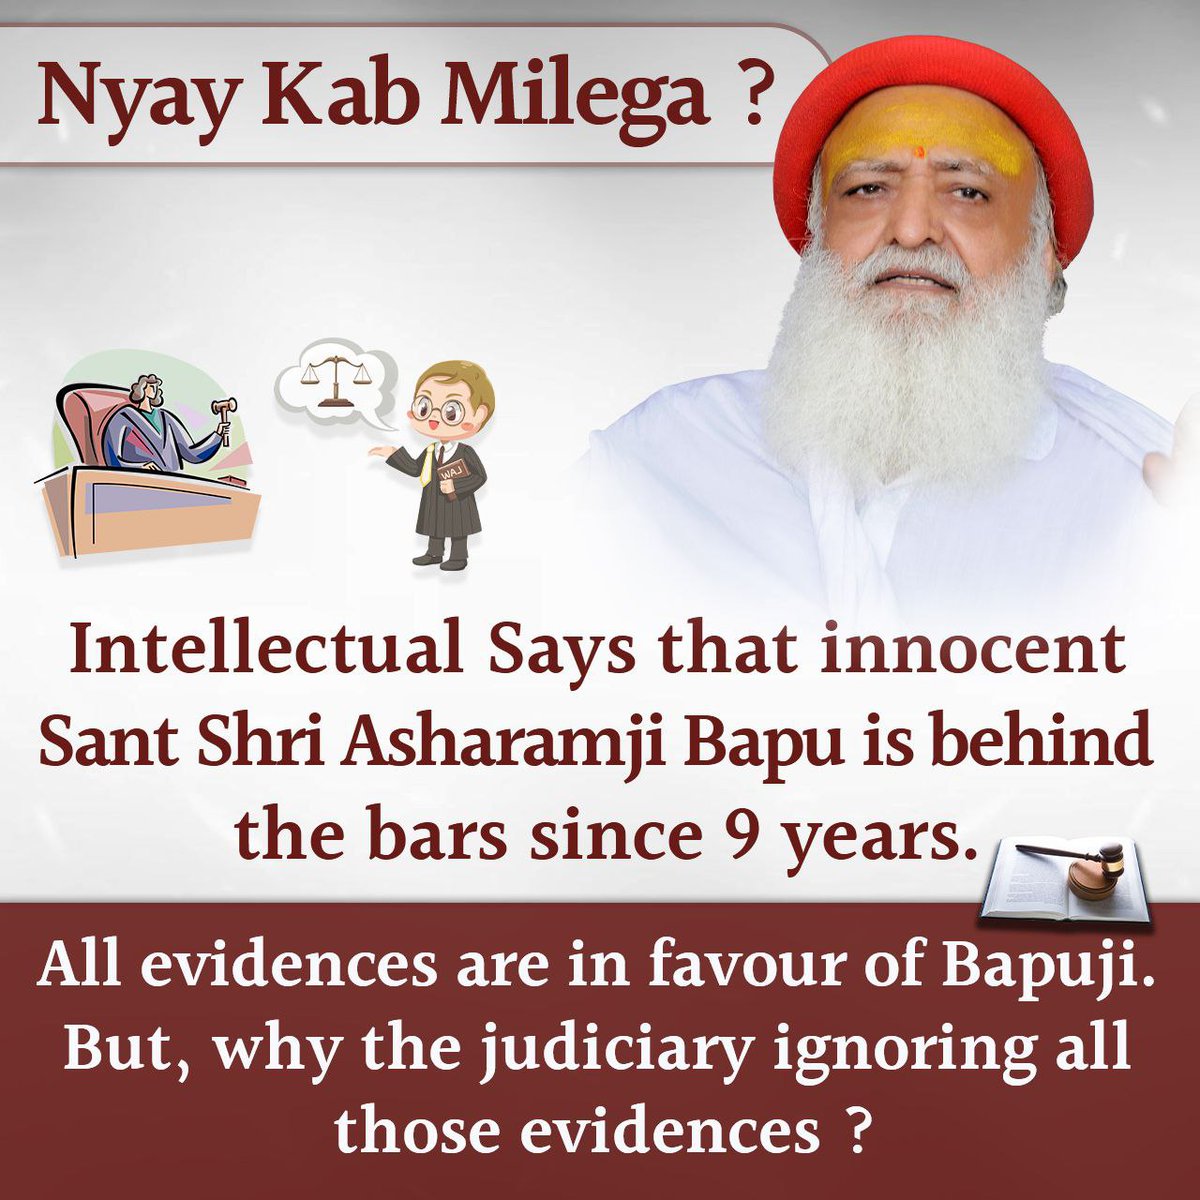 #EnoughIsEnough Indian Judiciary
If leaders, actors and terrorists can get bail in this country

So,Y not veteran Hindu Saint Sant Shri Asharamji Bapu

We want Fair Justice for bapuji.
It's time to #StandUpForDharm
Justice still awaited...
जय श्री राम